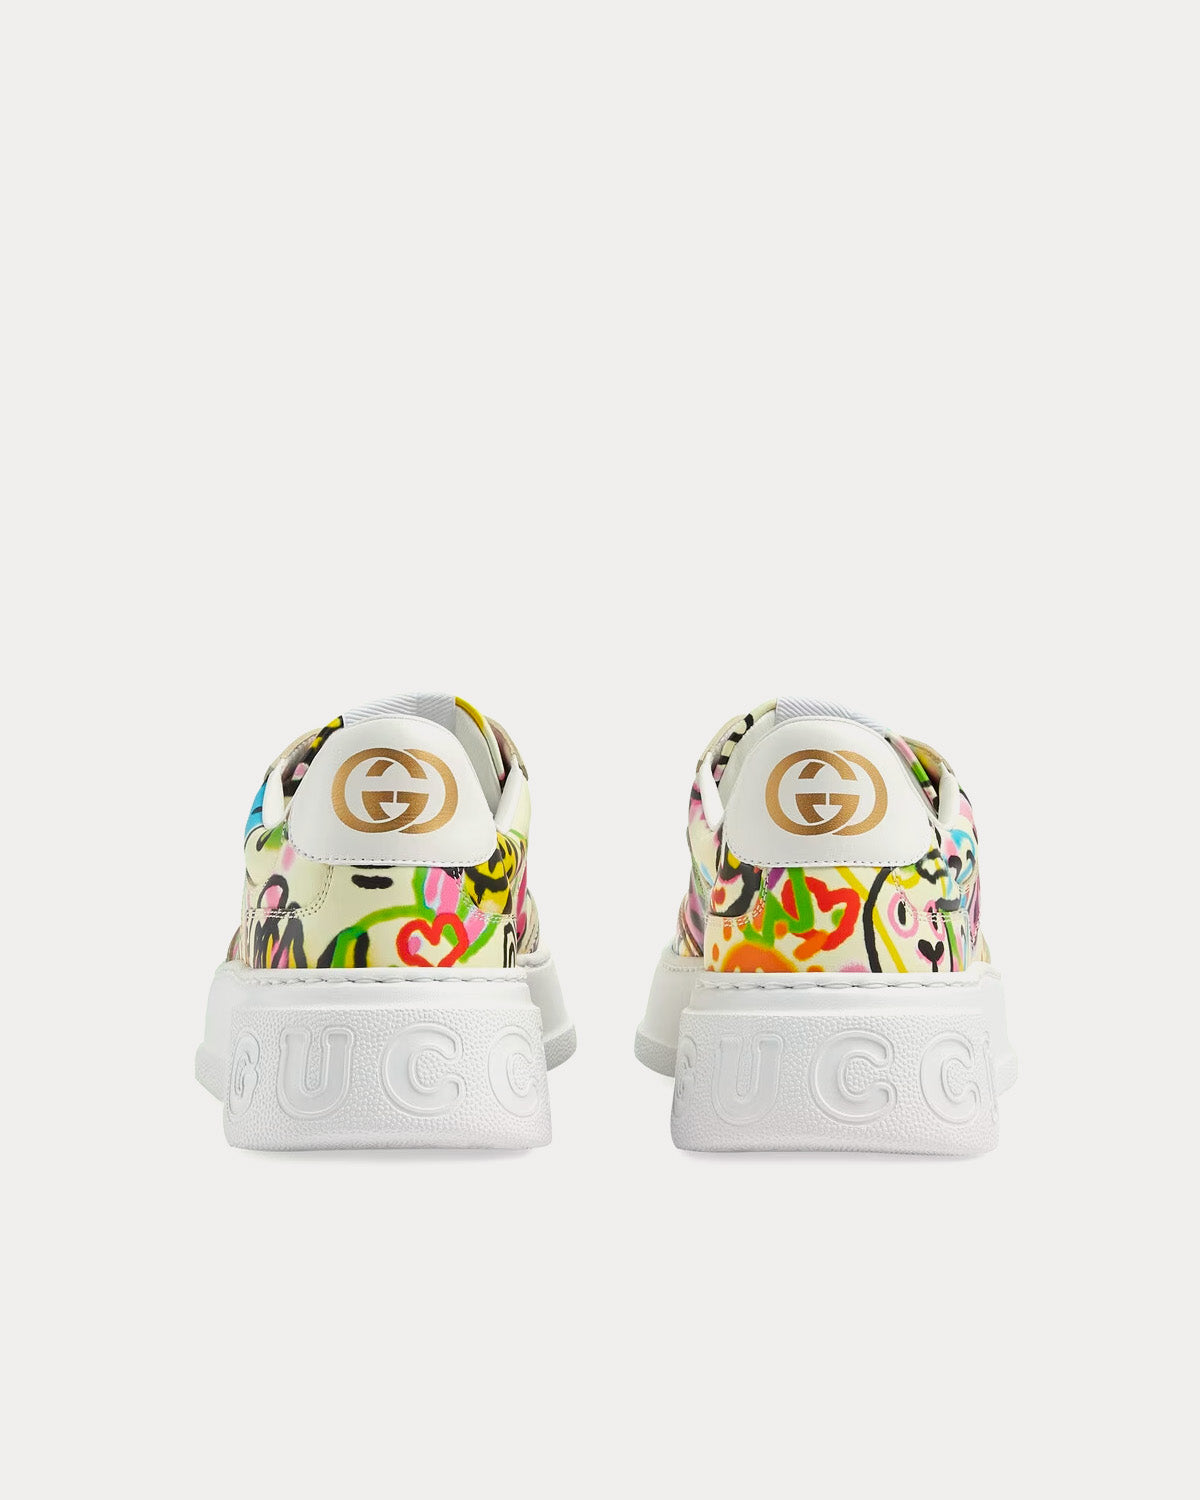 Gucci - Platform Bunny Graffiti Print Leather Ivory /  Multicolour Low Top Sneakers